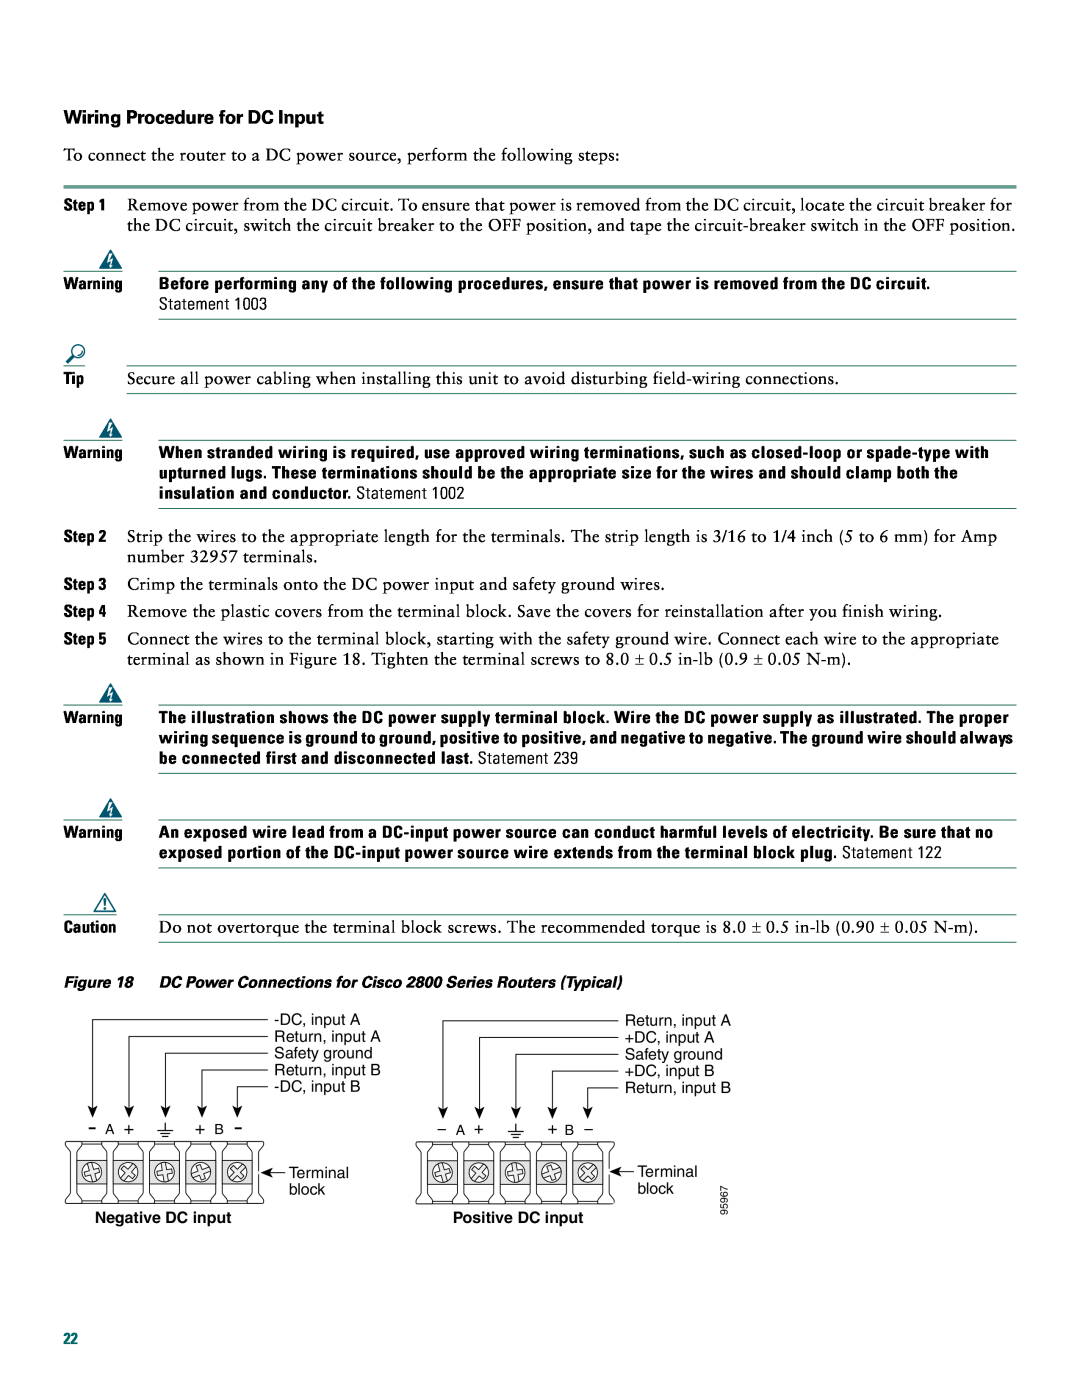 Cisco Systems 2800 manual Wiring Procedure for DC Input, be connected first and disconnected last. Statement 